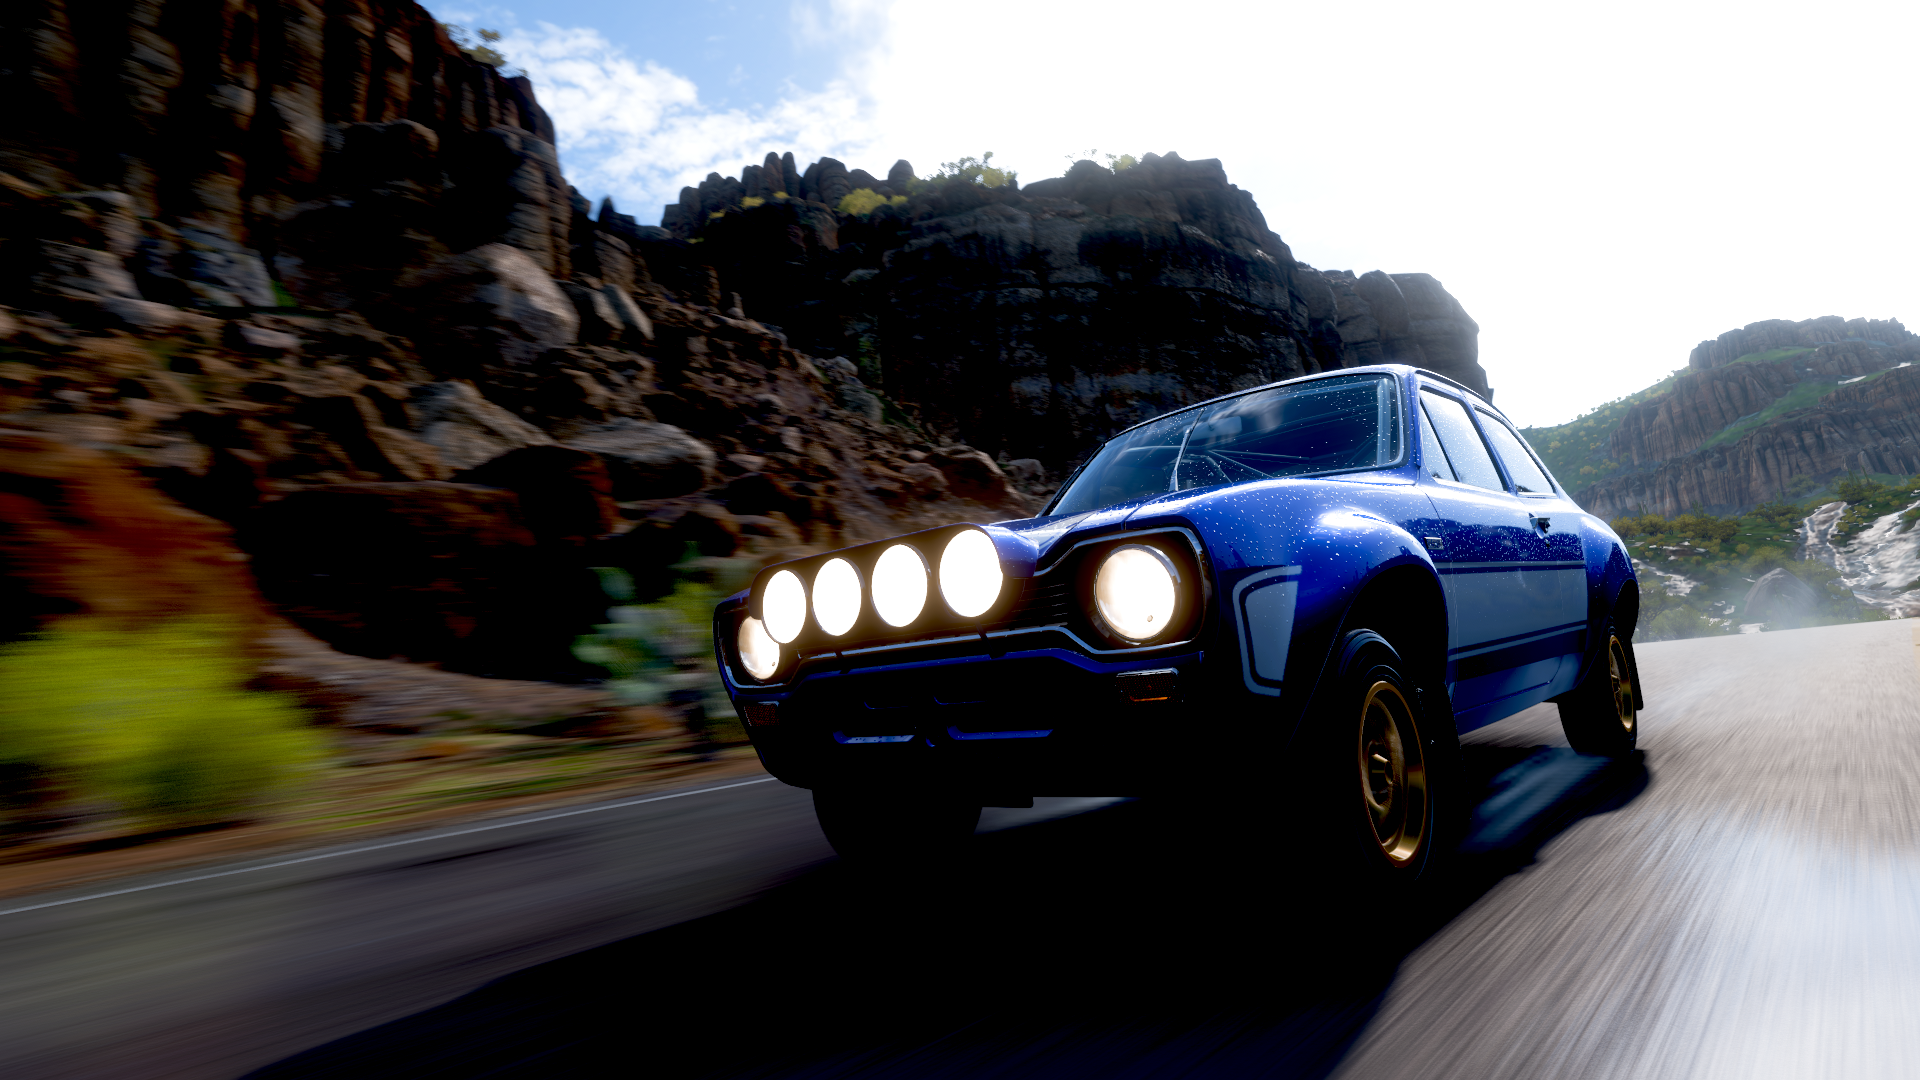 General 1920x1080 Forza Horizon 5 video games Ford Rally car headlights road clouds blue cars vehicle racing